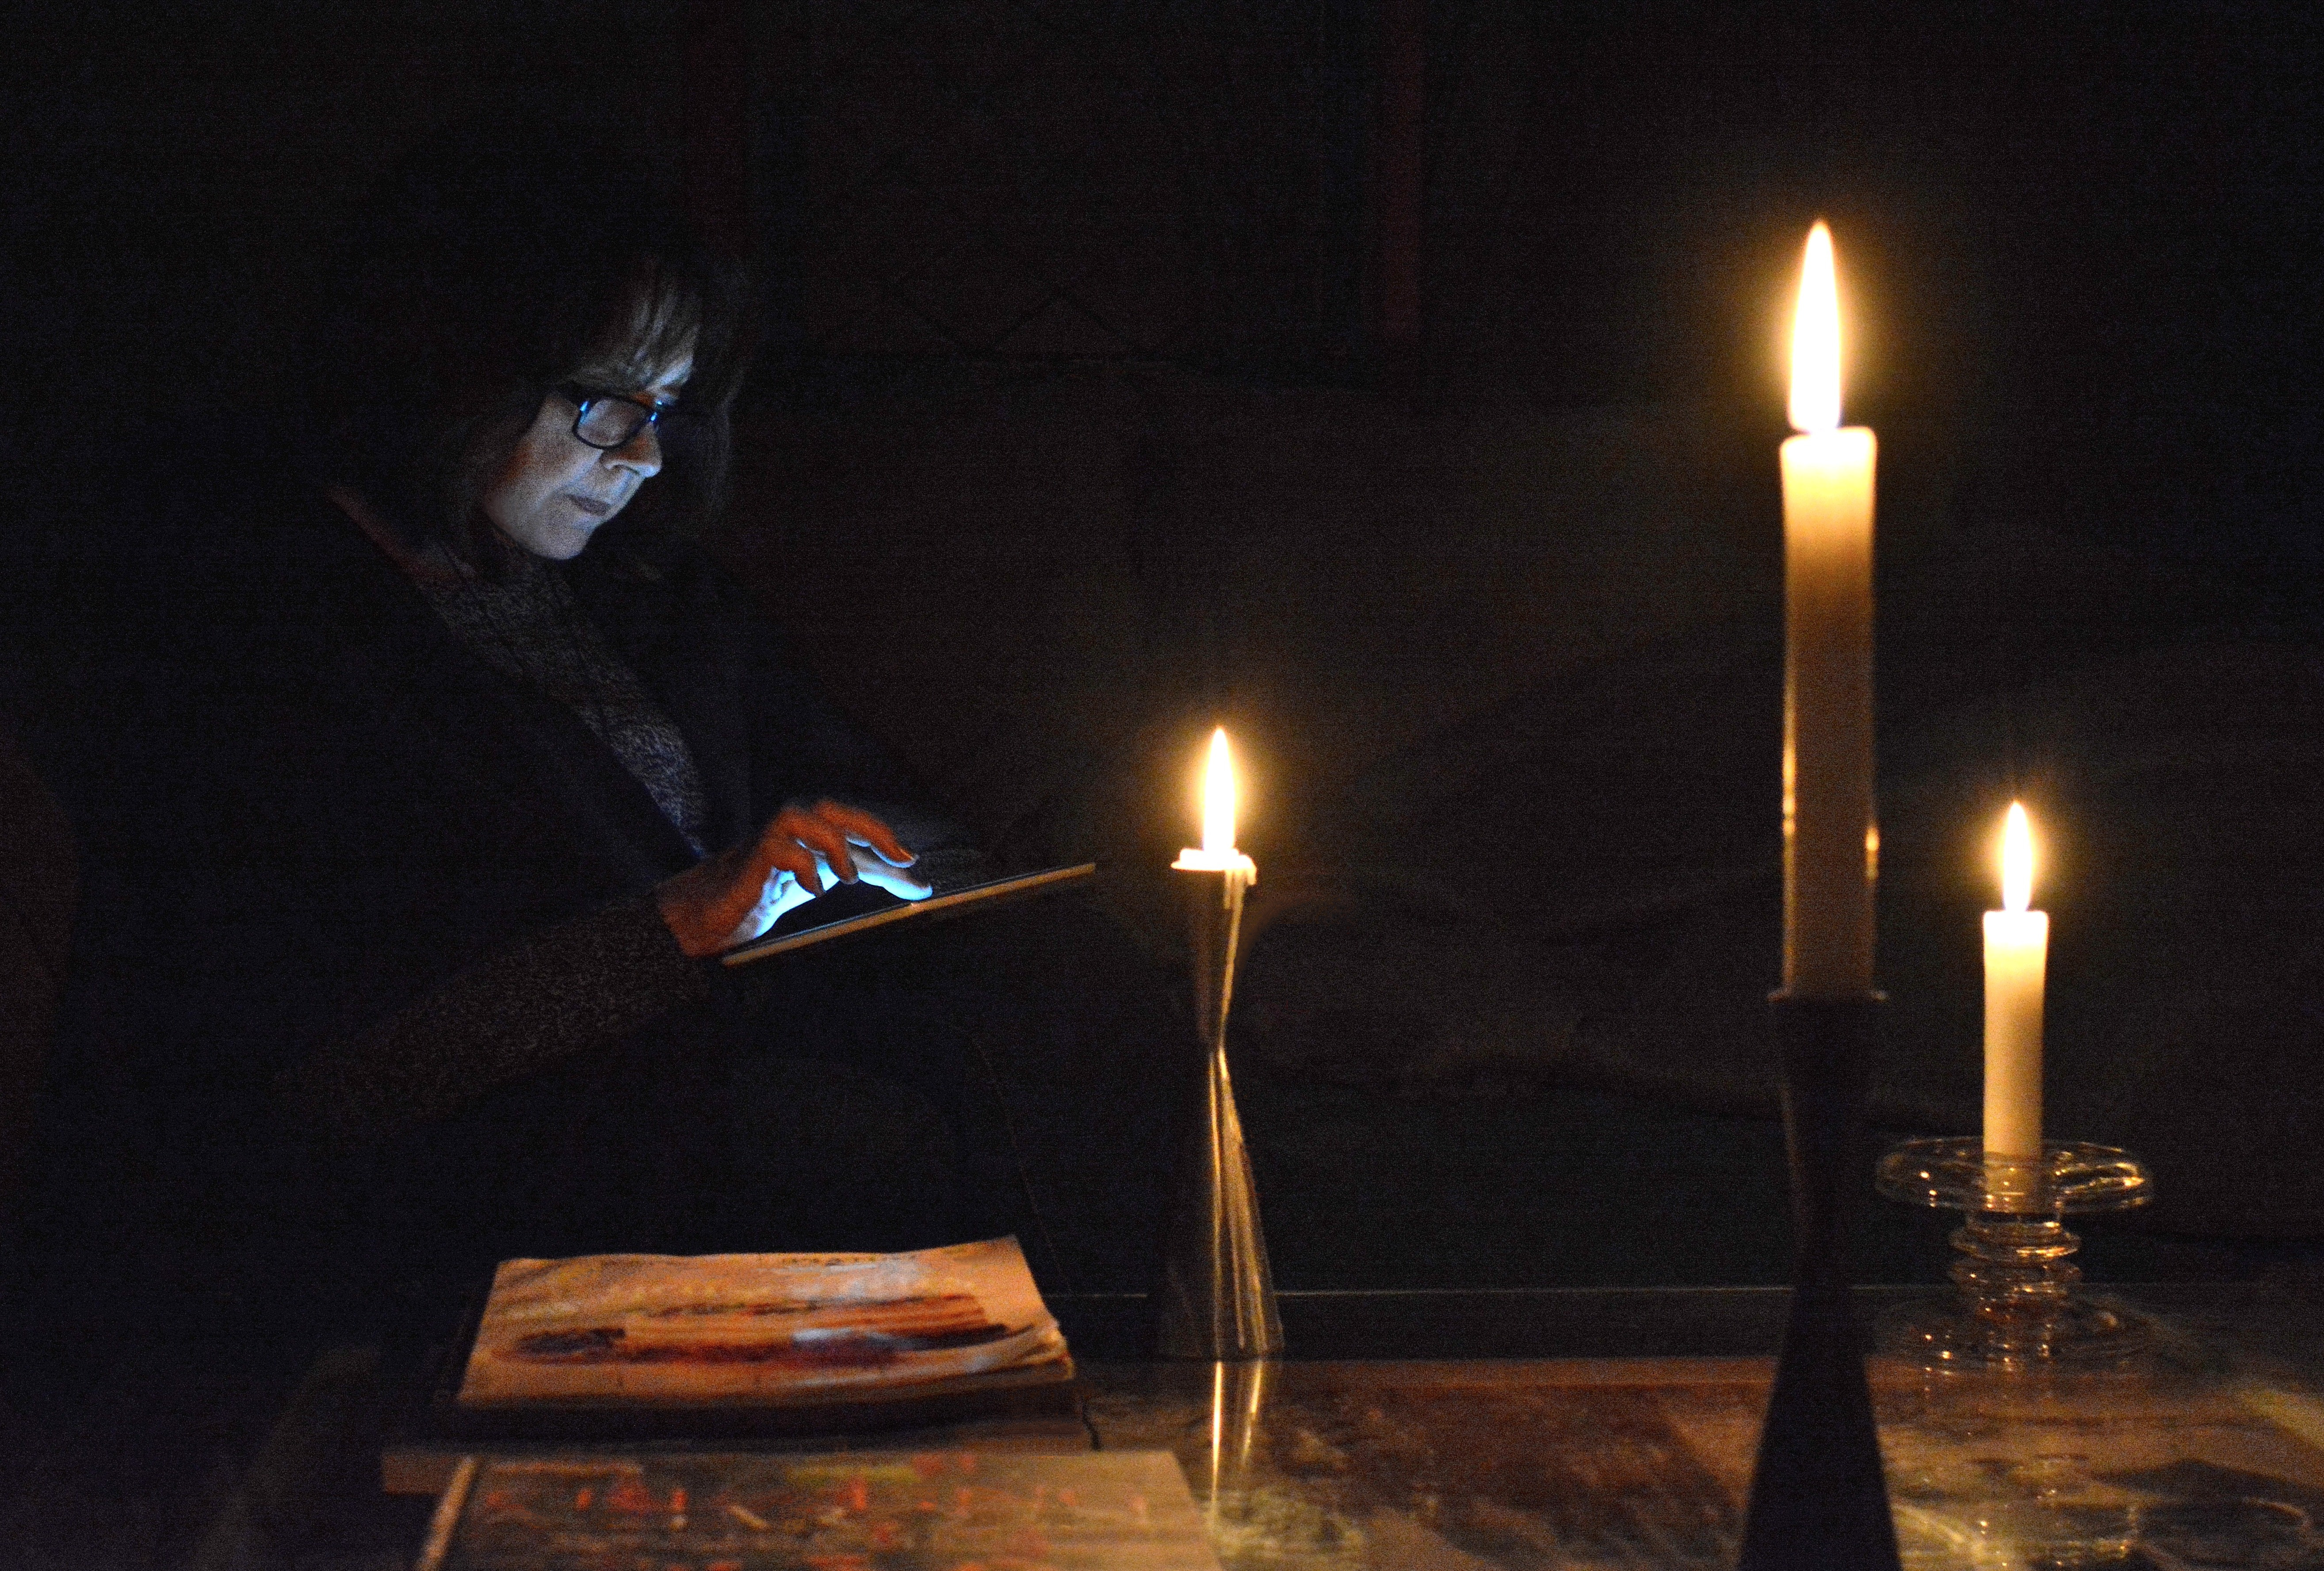 Lifestyle, " Power Failure, Reading by Candlelight "